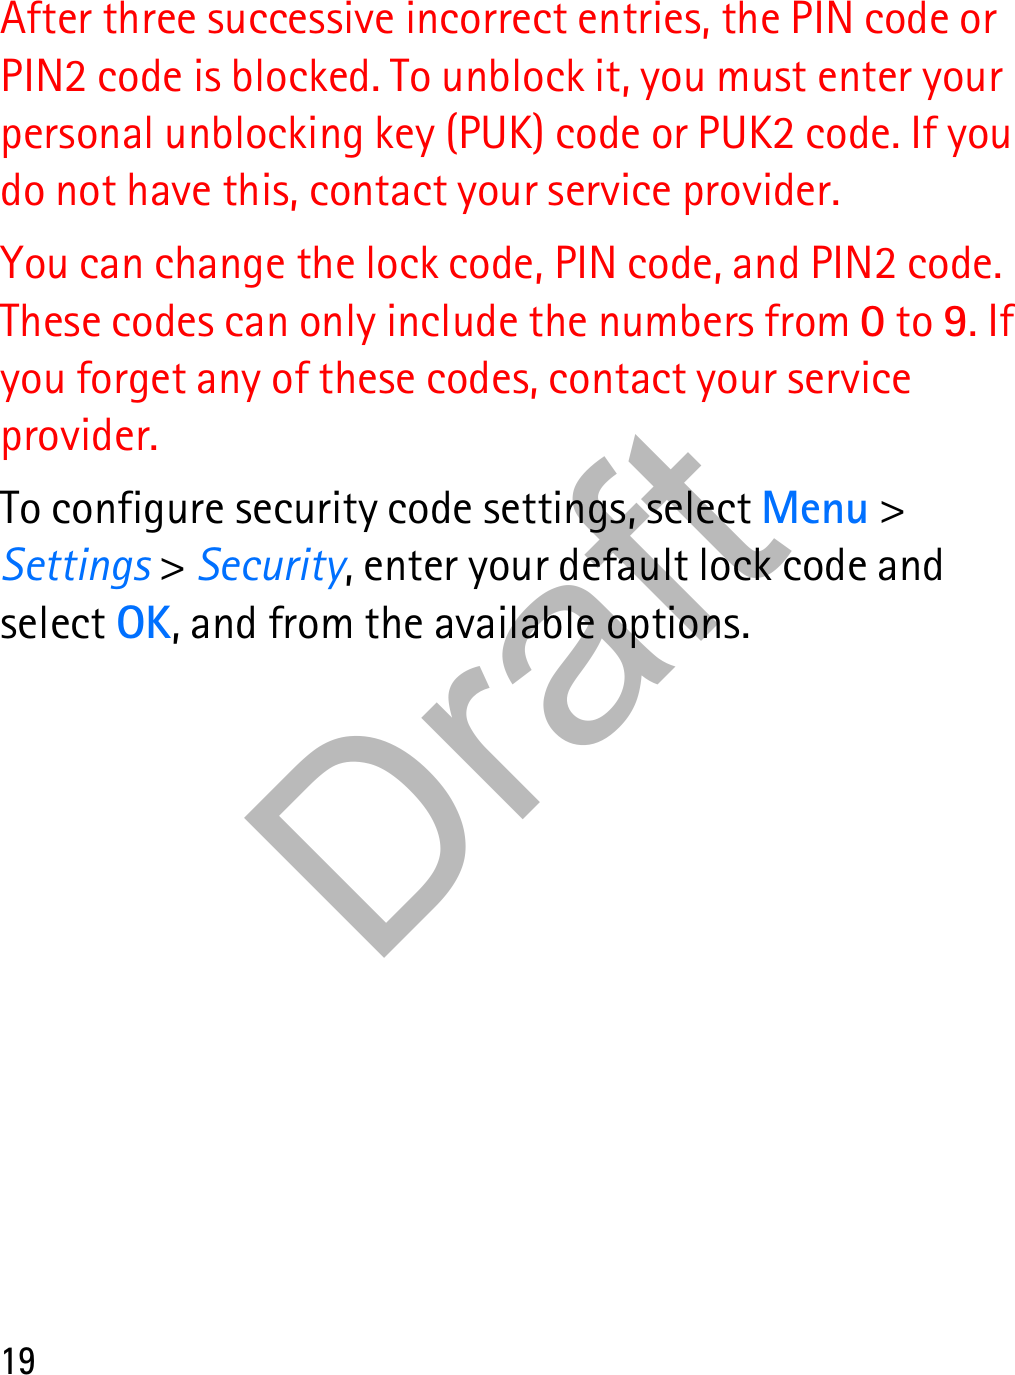 19After three successive incorrect entries, the PIN code or PIN2 code is blocked. To unblock it, you must enter your personal unblocking key (PUK) code or PUK2 code. If you do not have this, contact your service provider.You can change the lock code, PIN code, and PIN2 code. These codes can only include the numbers from 0 to 9. If you forget any of these codes, contact your service provider.To configure security code settings, select Menu &gt; Settings &gt; Security, enter your default lock code and select OK, and from the available options.Draft